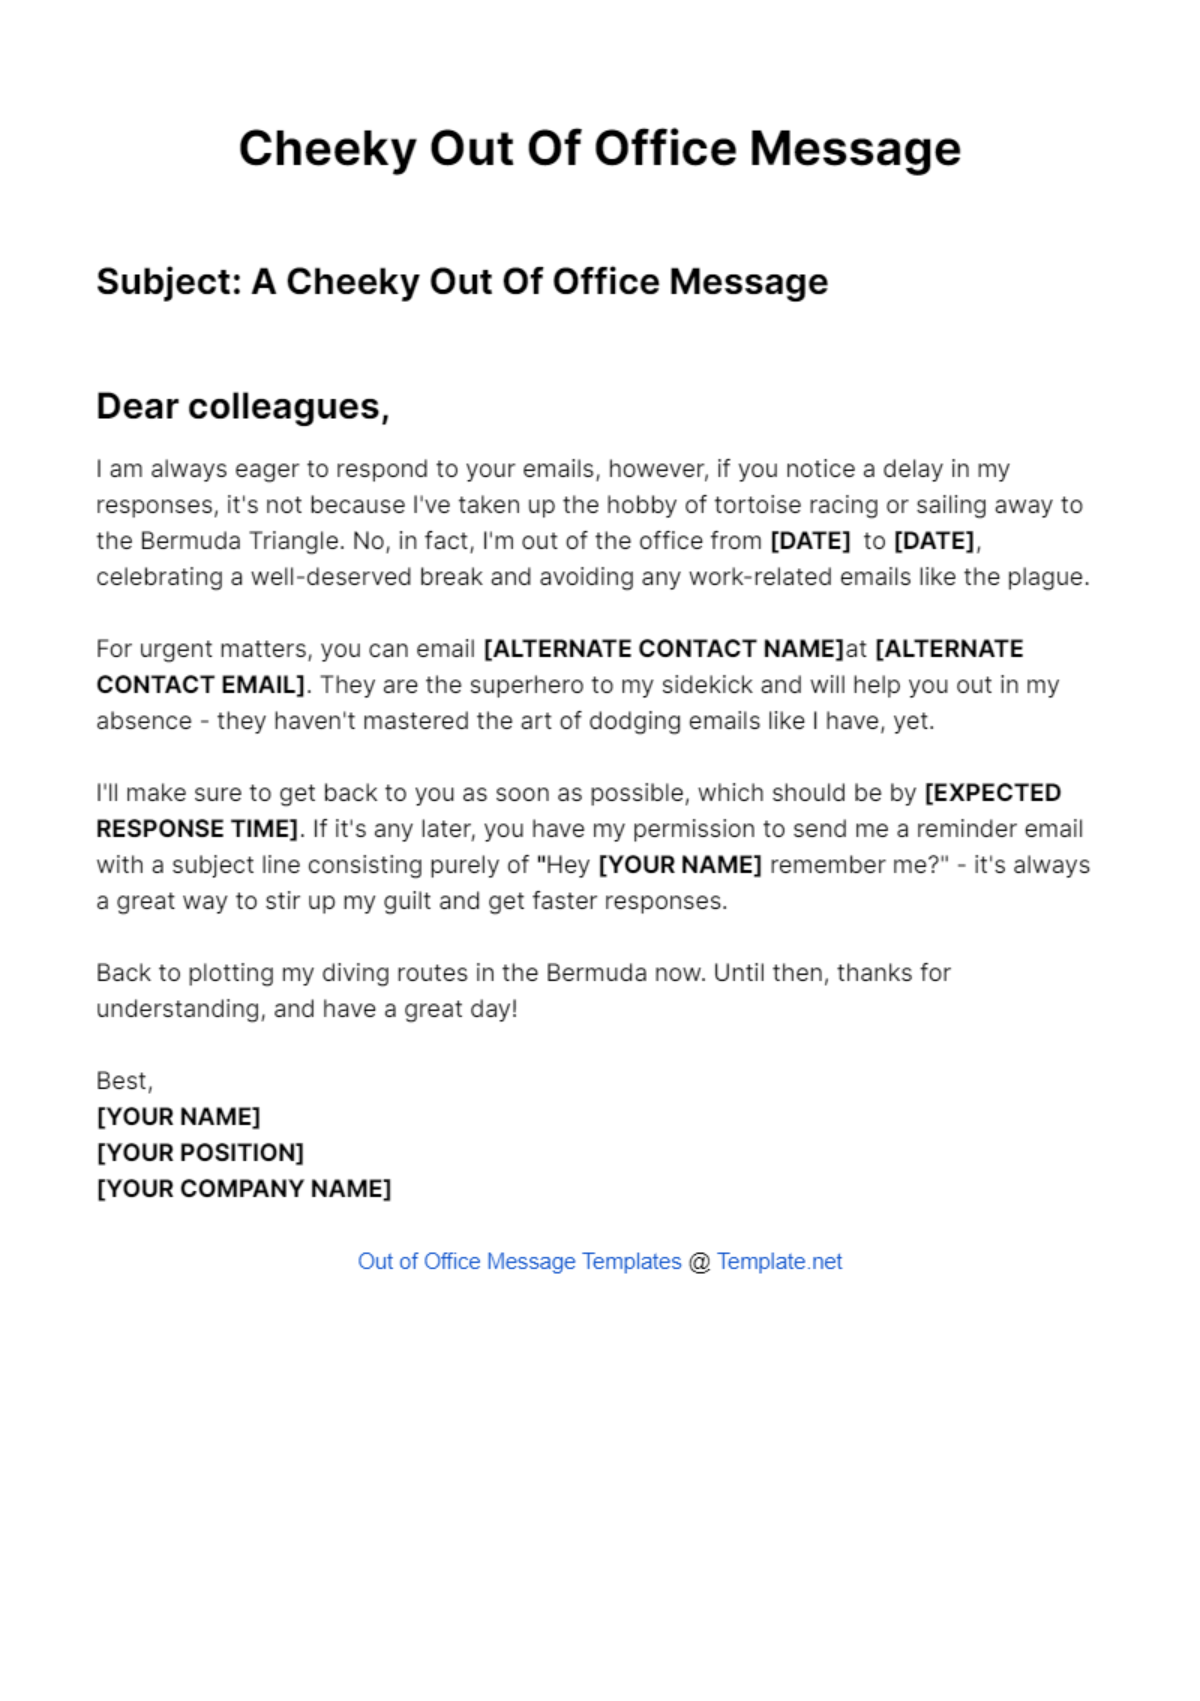 Cheeky Out Of Office Message Template